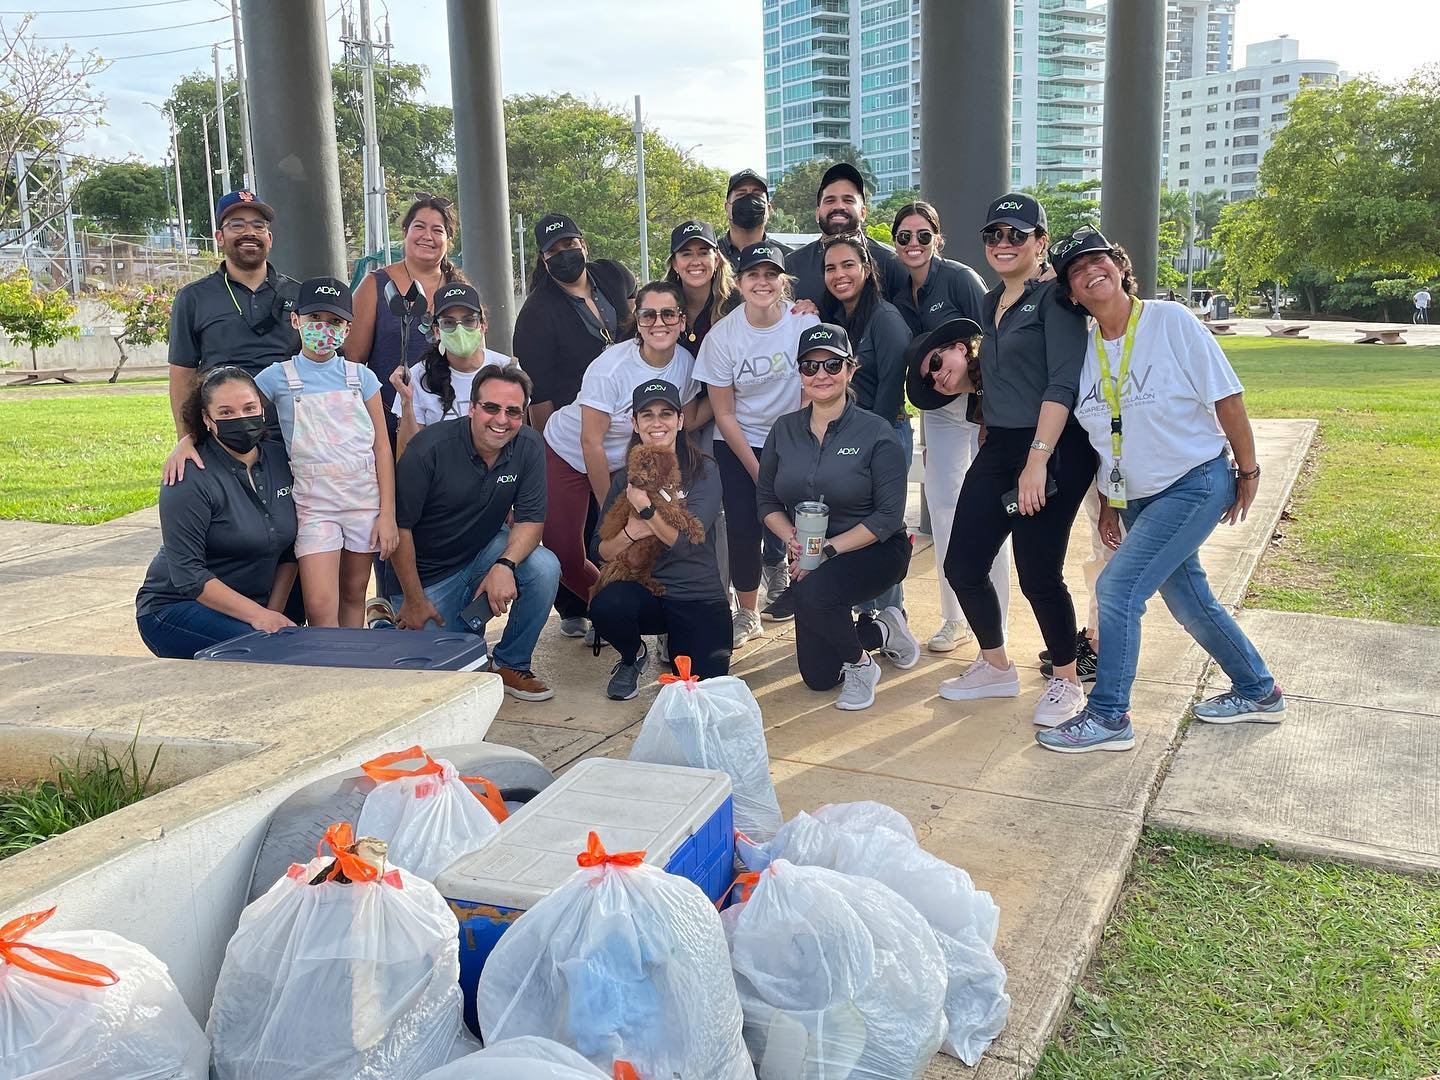  AD&amp;V team picture at Condado Lagoon Cleanup 